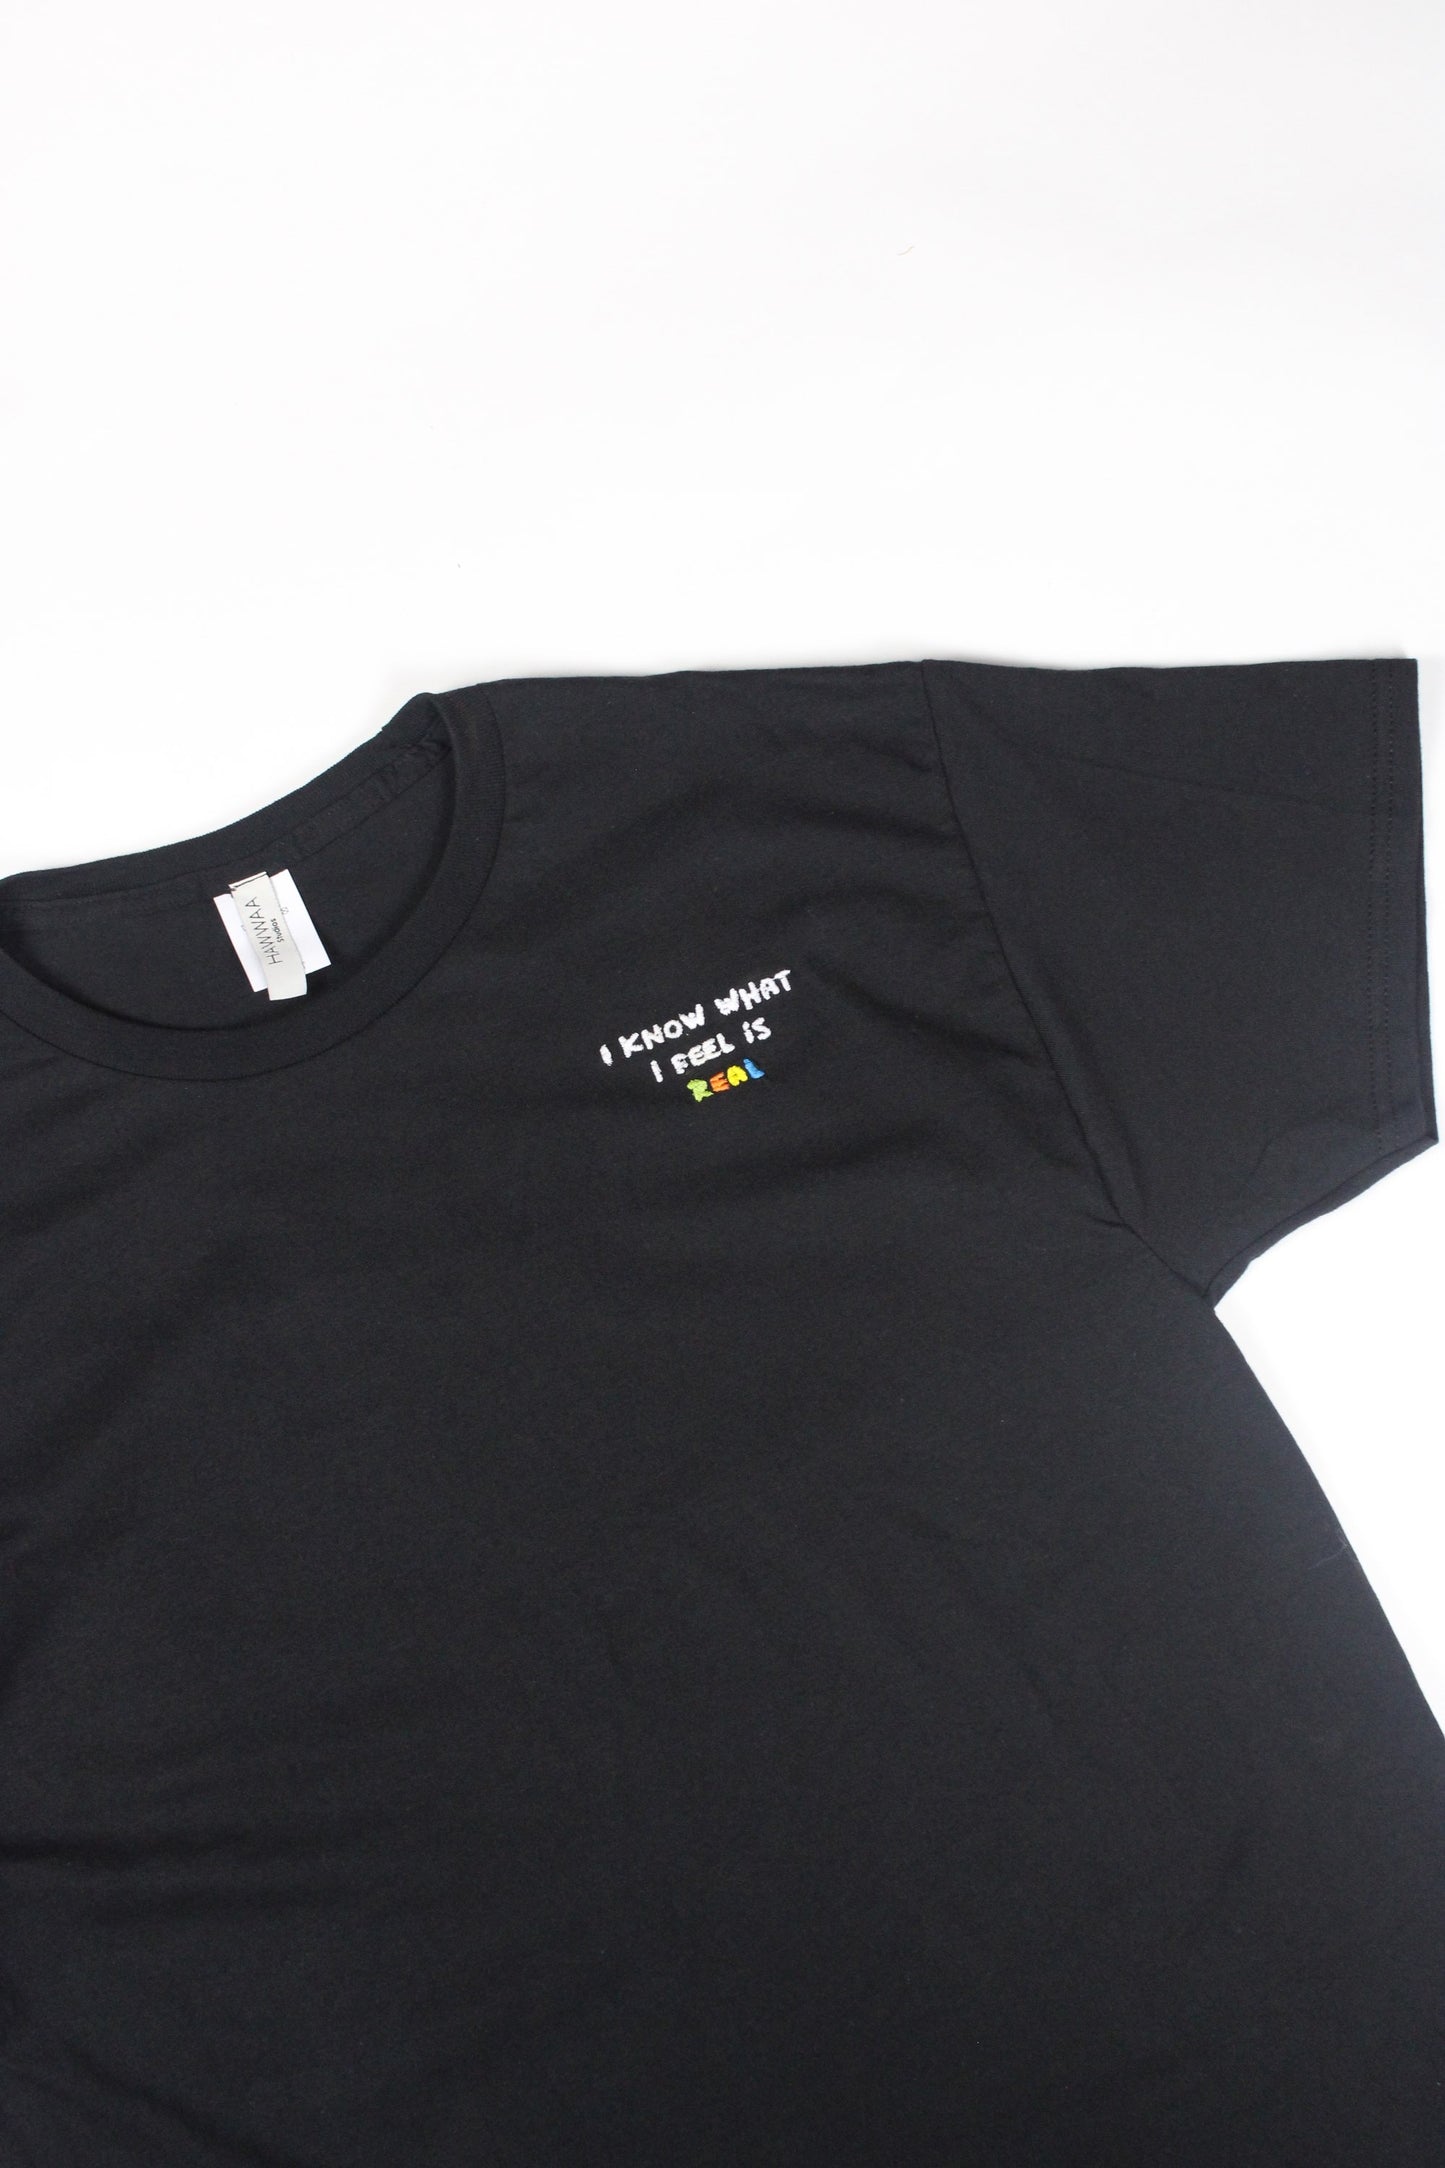 "I Know What I Feel Is Real" Embroidered T-Shirt